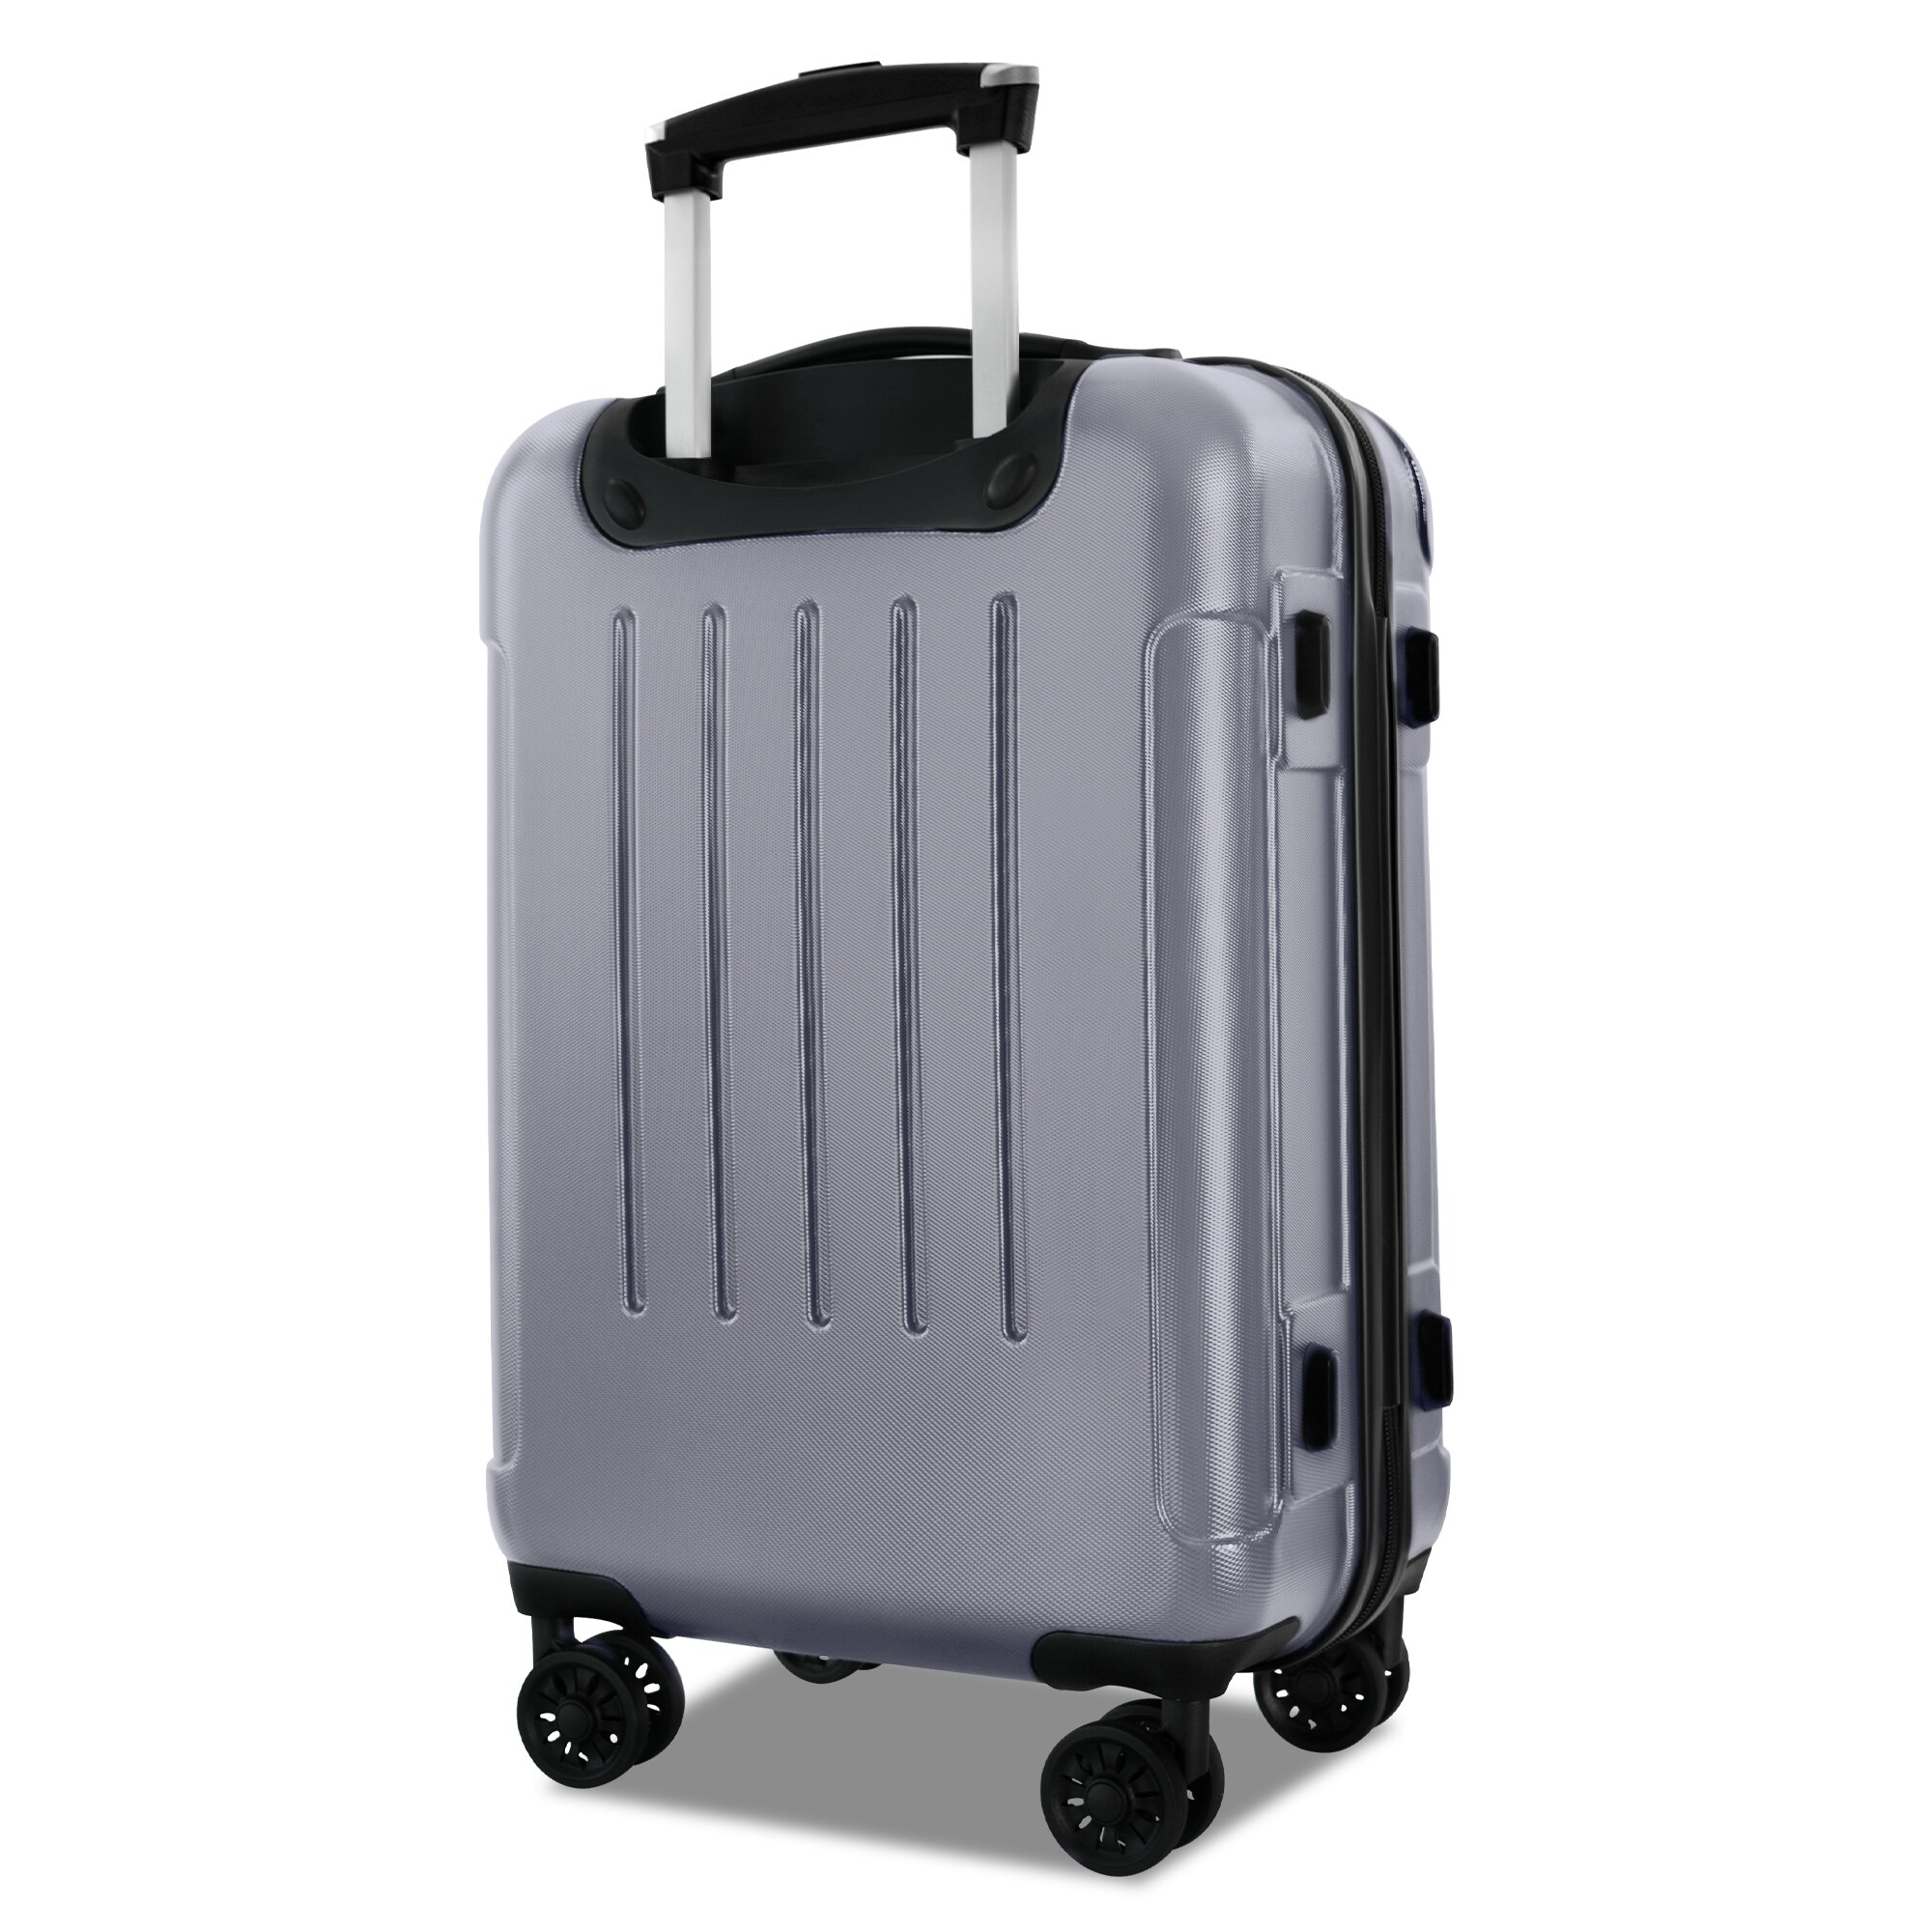 Hard Case Luggage Sets Clearance Expandable 3 Piece Set ABS+PC Material  Spinner Wheel Luggage 18/22/26 - Bed Bath & Beyond - 38396368